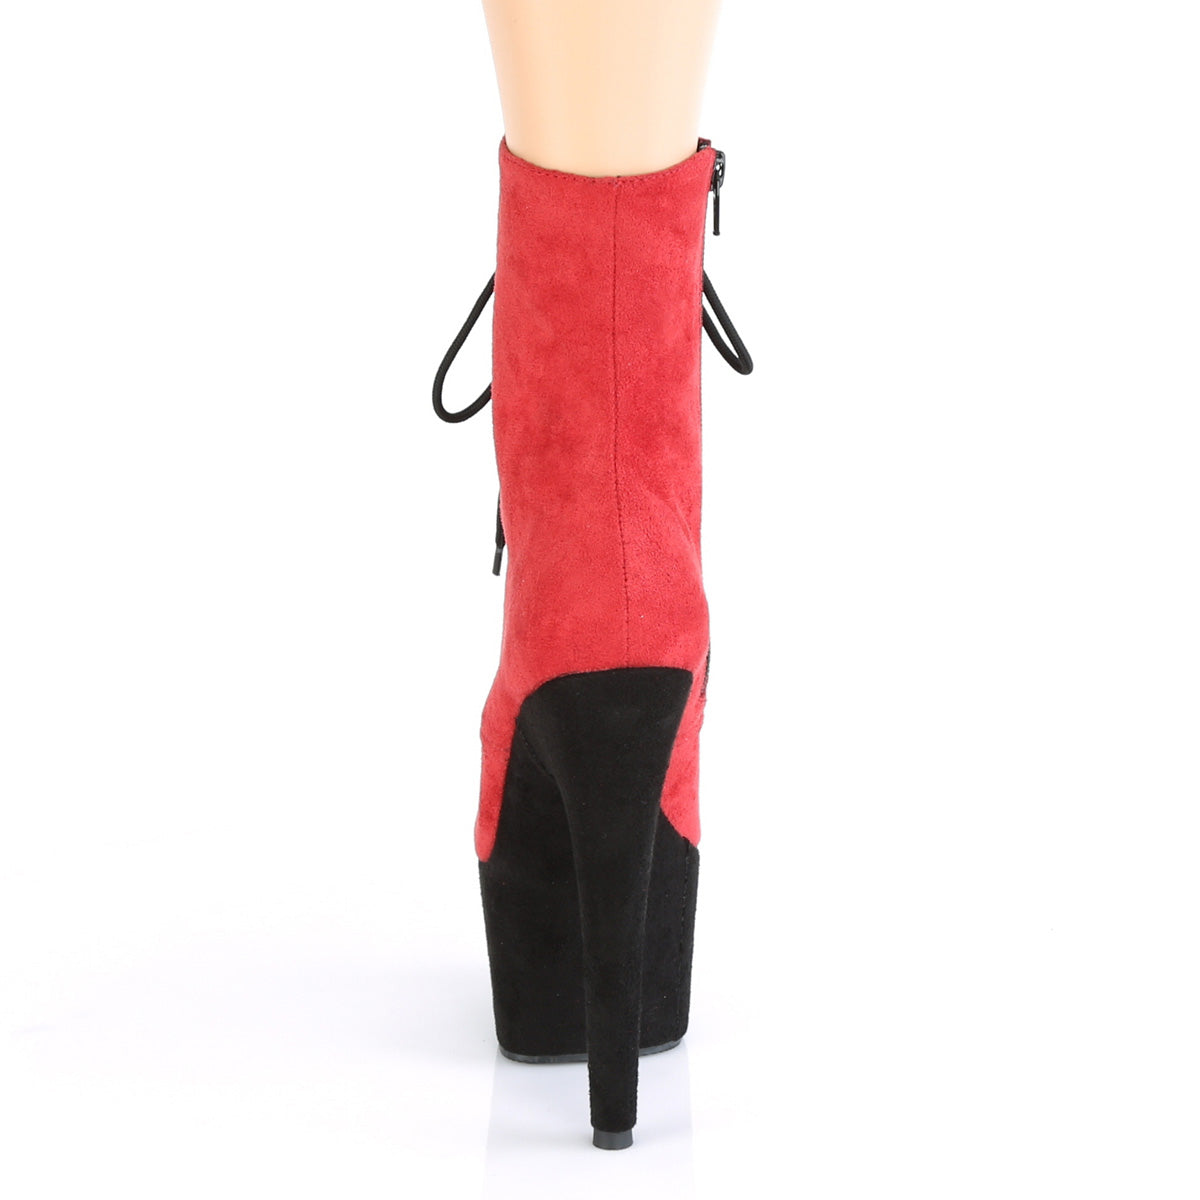 ADORE-1020FSTT Pleaser 7" Heel Red Exotic Dancing Ankle Boot-Pleaser- Sexy Shoes Fetish Footwear